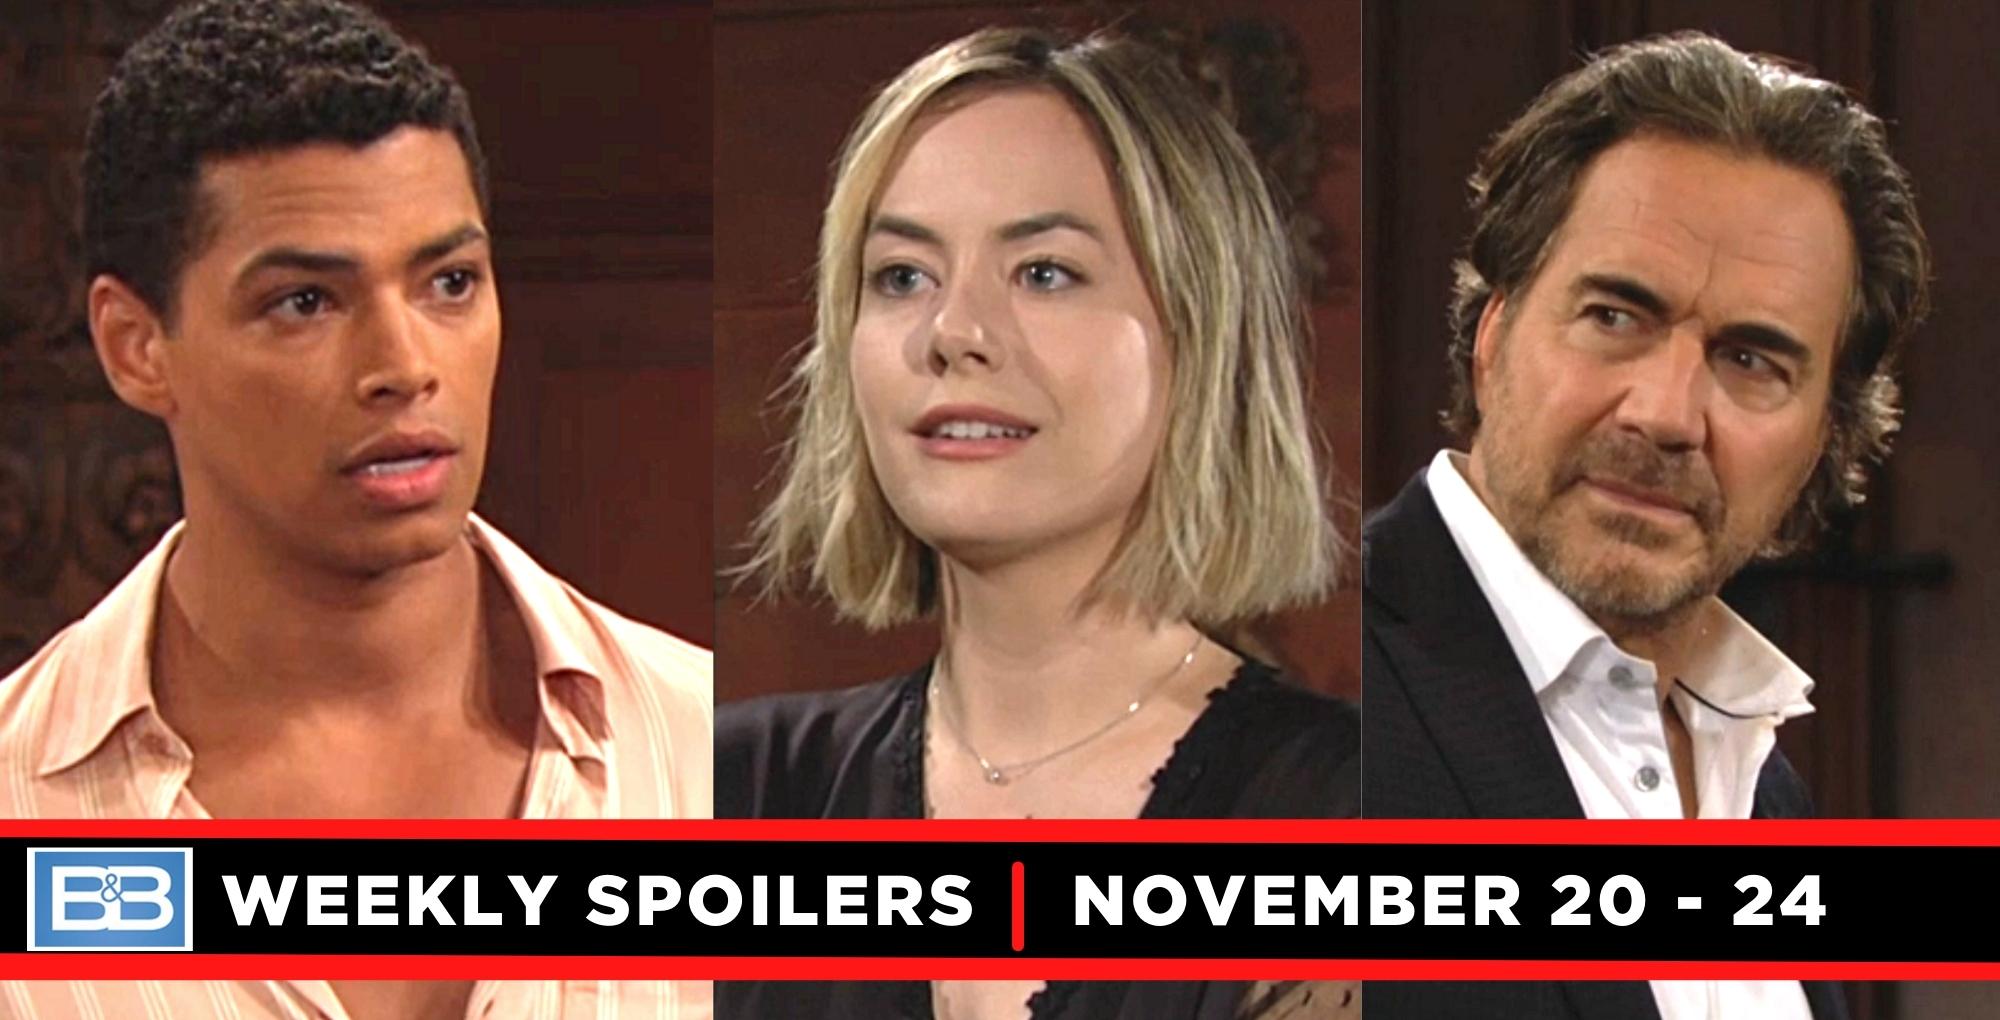 weekly bold and the beautiful spoilers with zende forrester, hope logan, and ridge forrester.